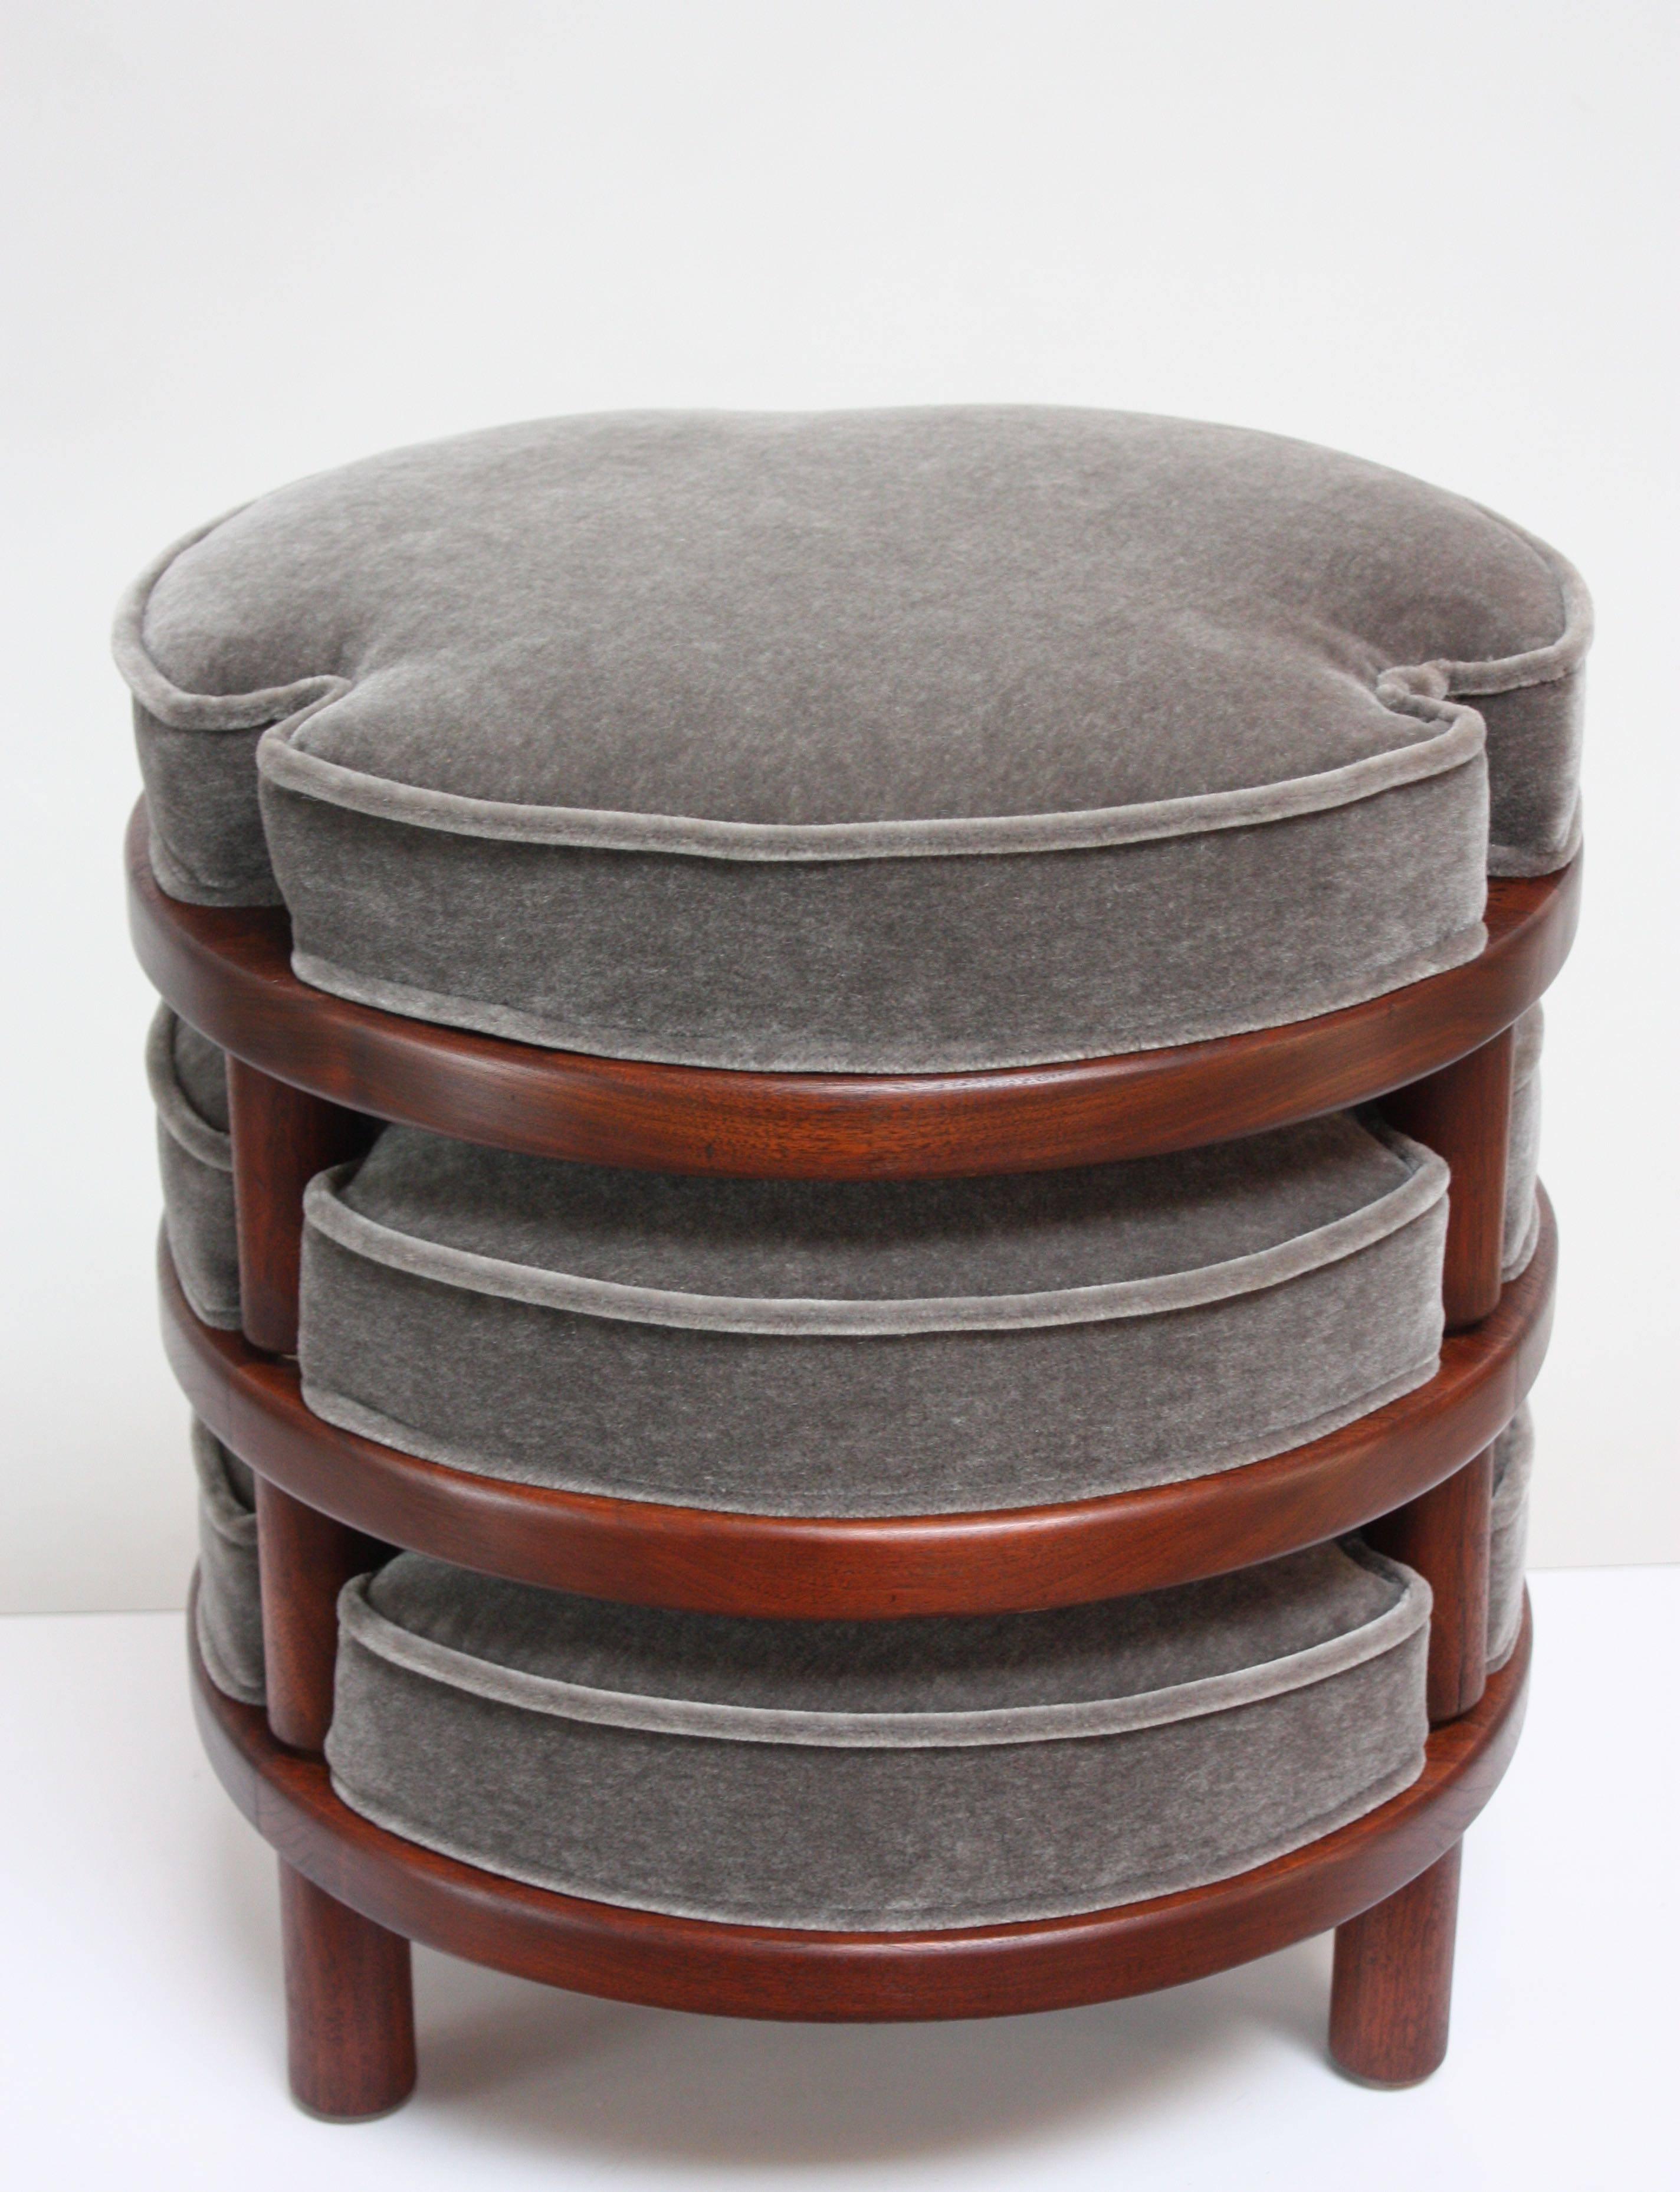 Luxe set of three stacking ottomans in mahogany with new foam and light charcoal mohair cushions. Three 'cut-out' corners
per cushion in which the cylindrical feet nest.
Frames have been refinished; mohair and foam are new.
Listed height reflects